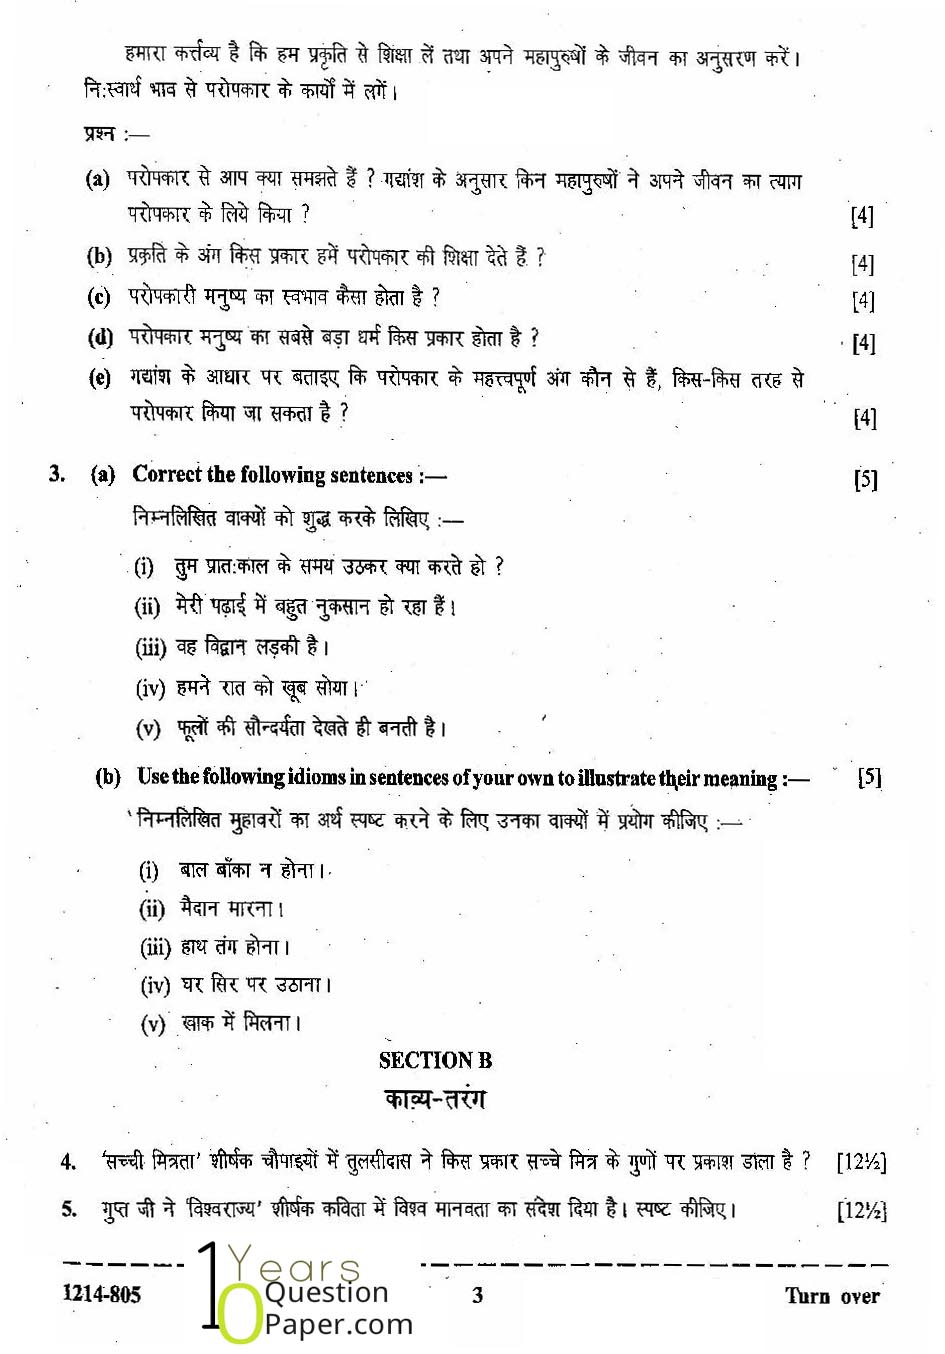 ISC Class 12 Hindi 2014 Question Paper